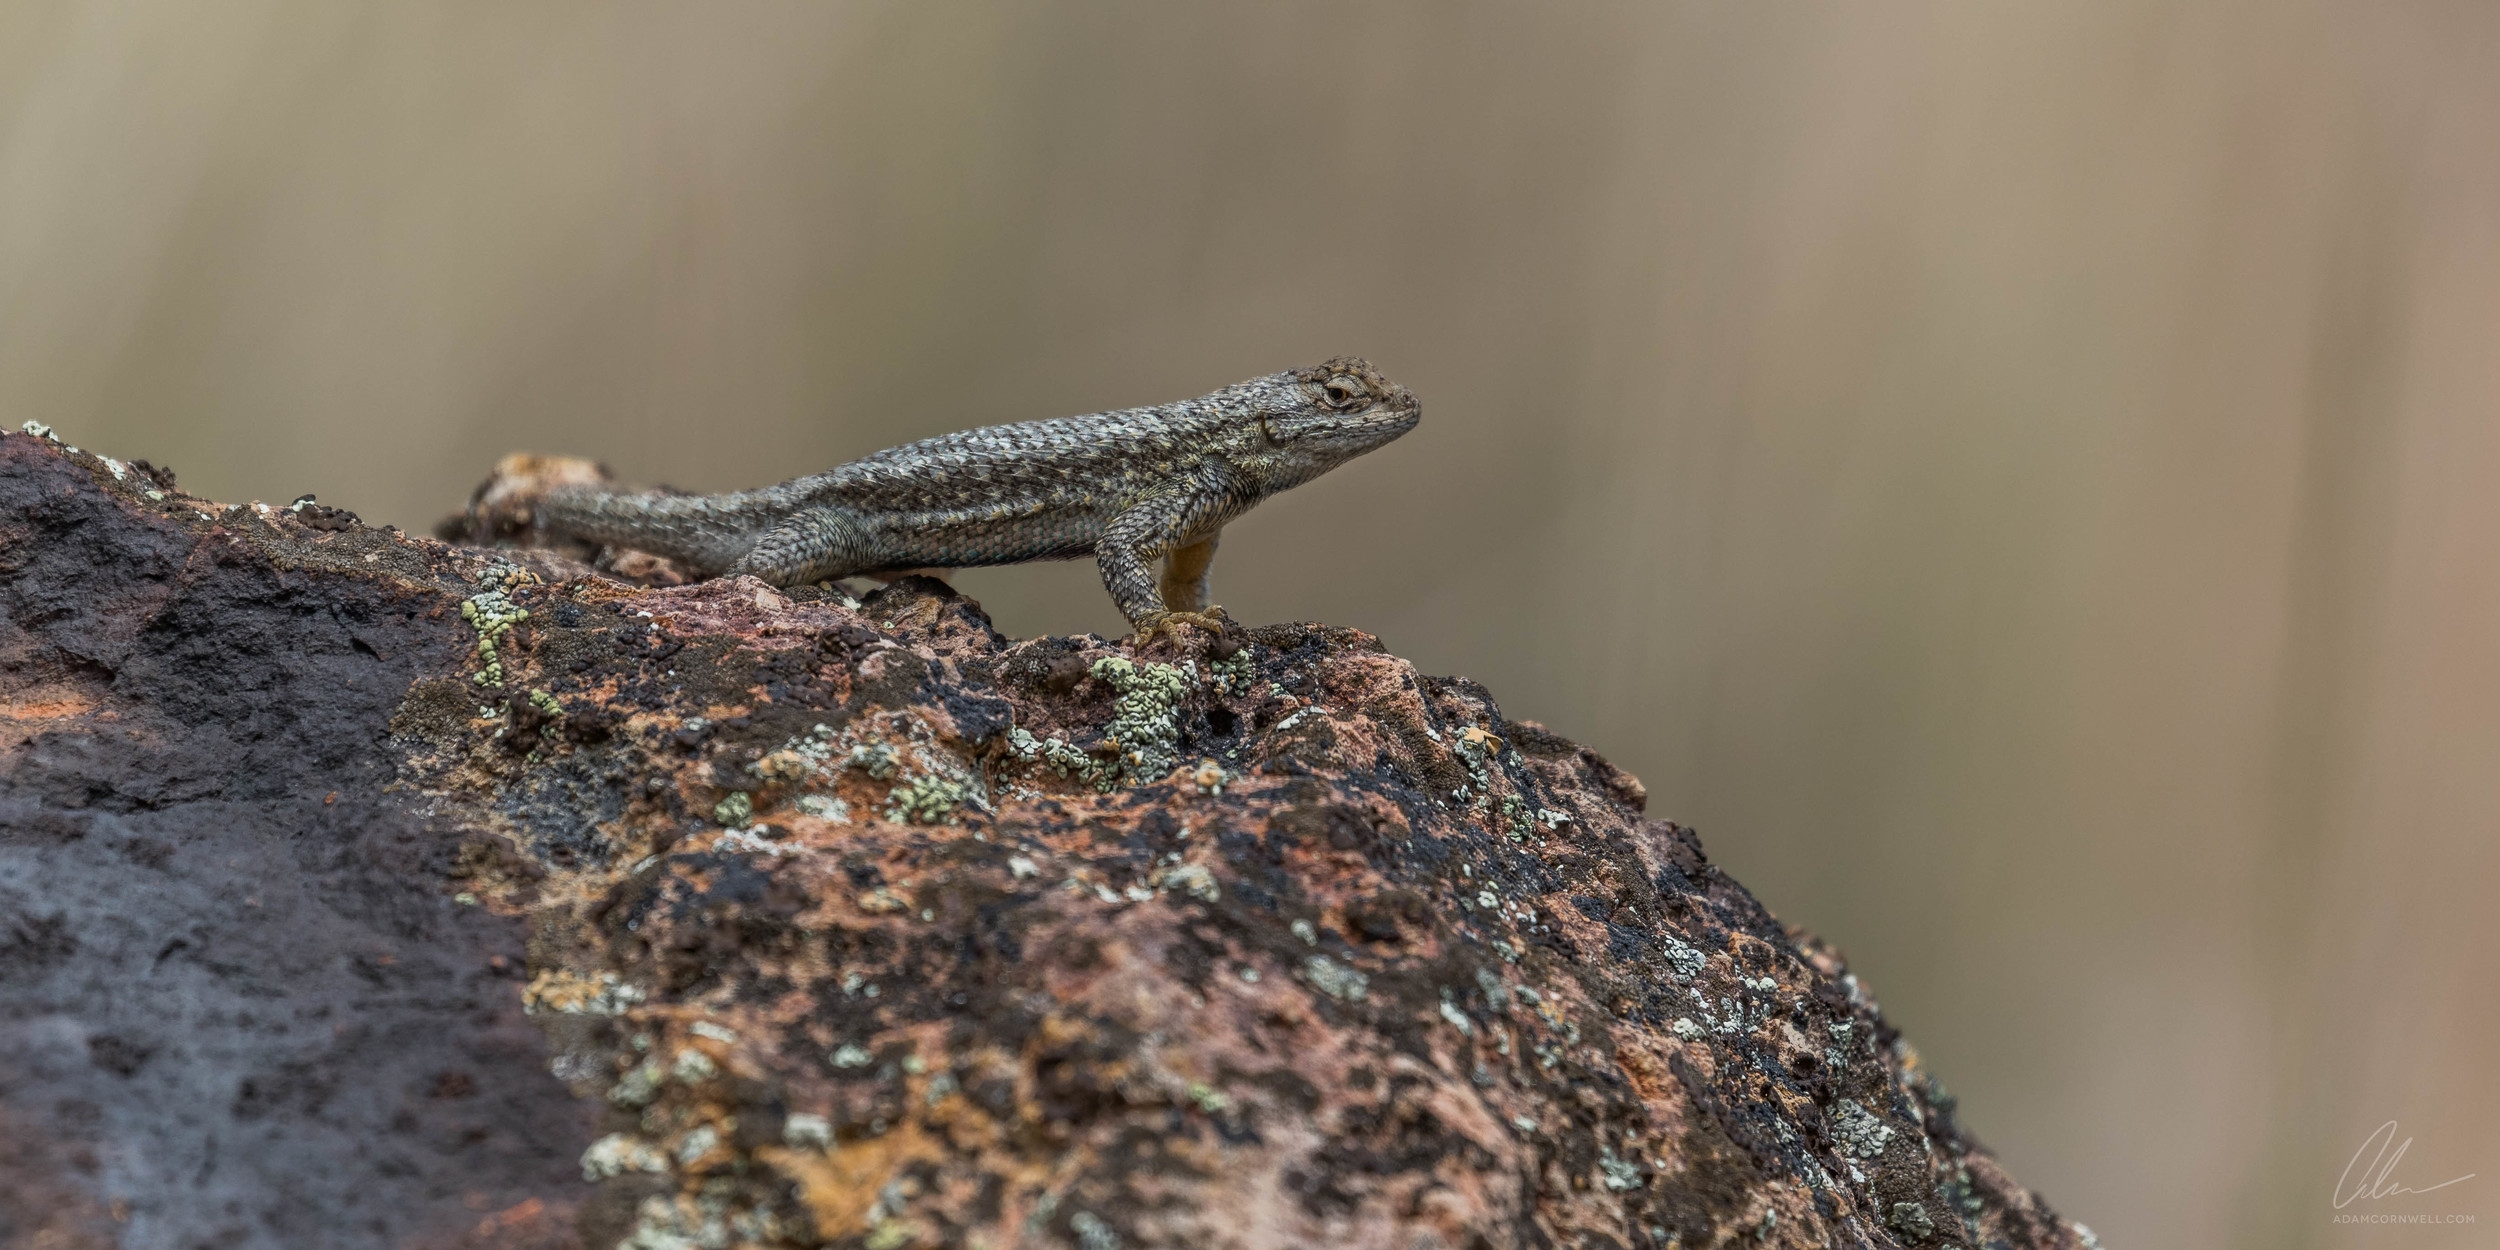   Western Fence Lizard  Painted Hills, OR #20150522_0258 